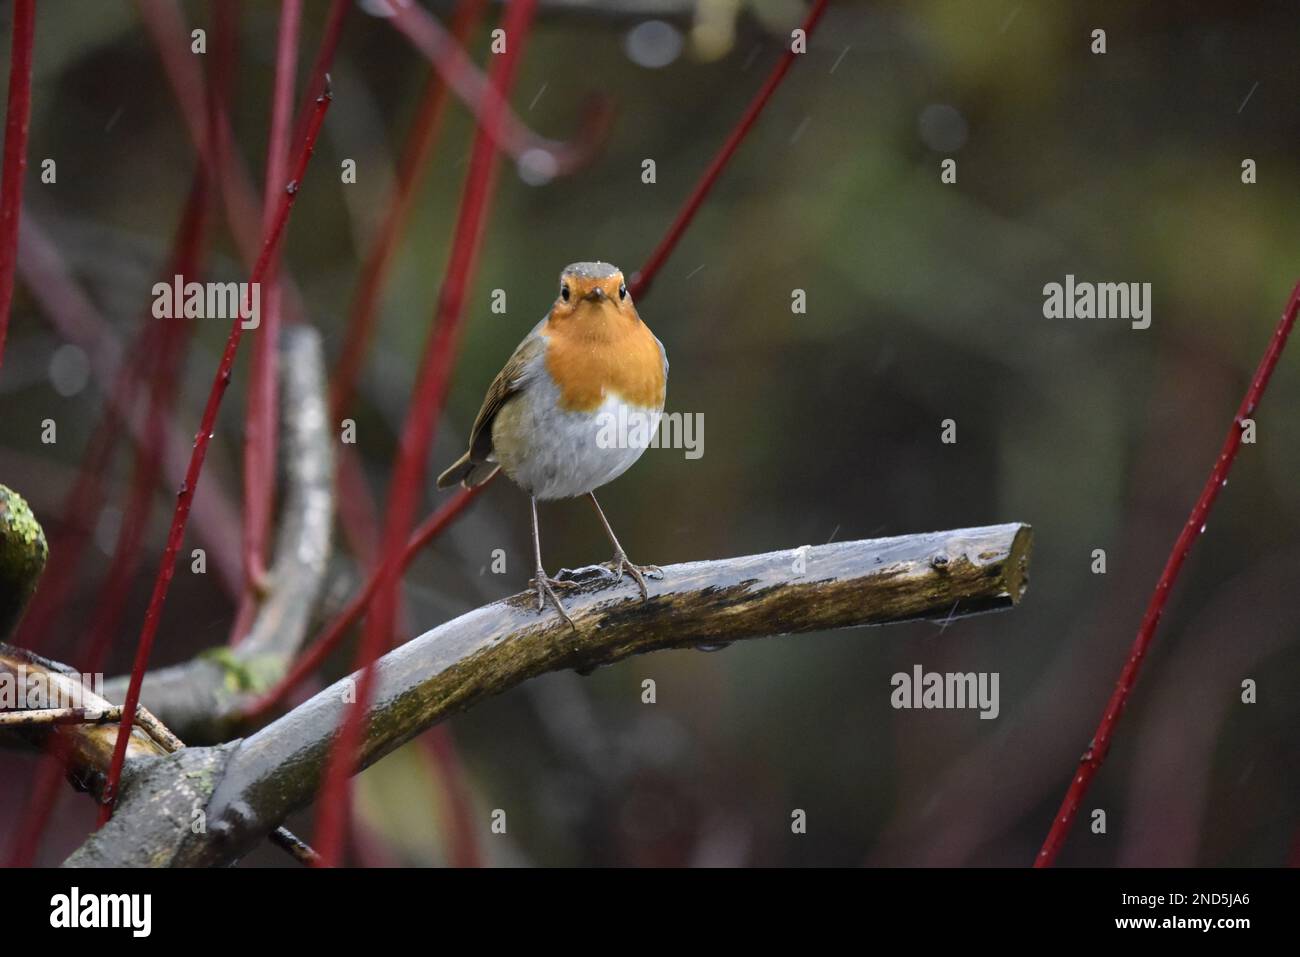 European Robin (Erithacus rubecula) Facing Camera from a Wet Branch in the Rain, with Dogwood Twigs to Left against a Green Background in the UK Stock Photo